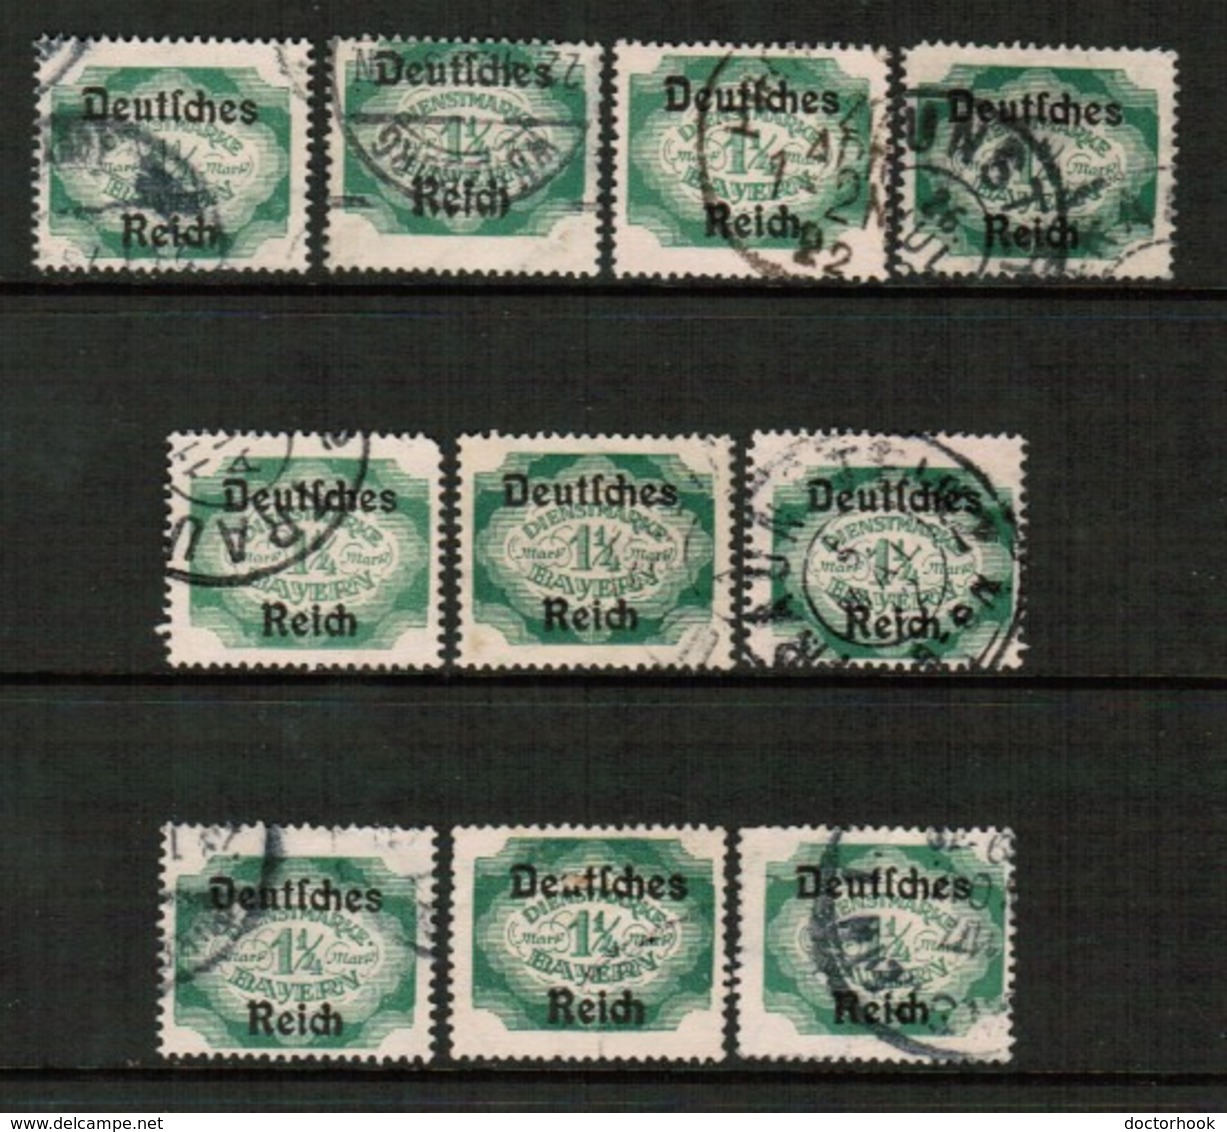 BAVARIA  Scott # O 65 USED WHOLESALE LOT OF 10 (WH-314) - Lots & Kiloware (mixtures) - Max. 999 Stamps